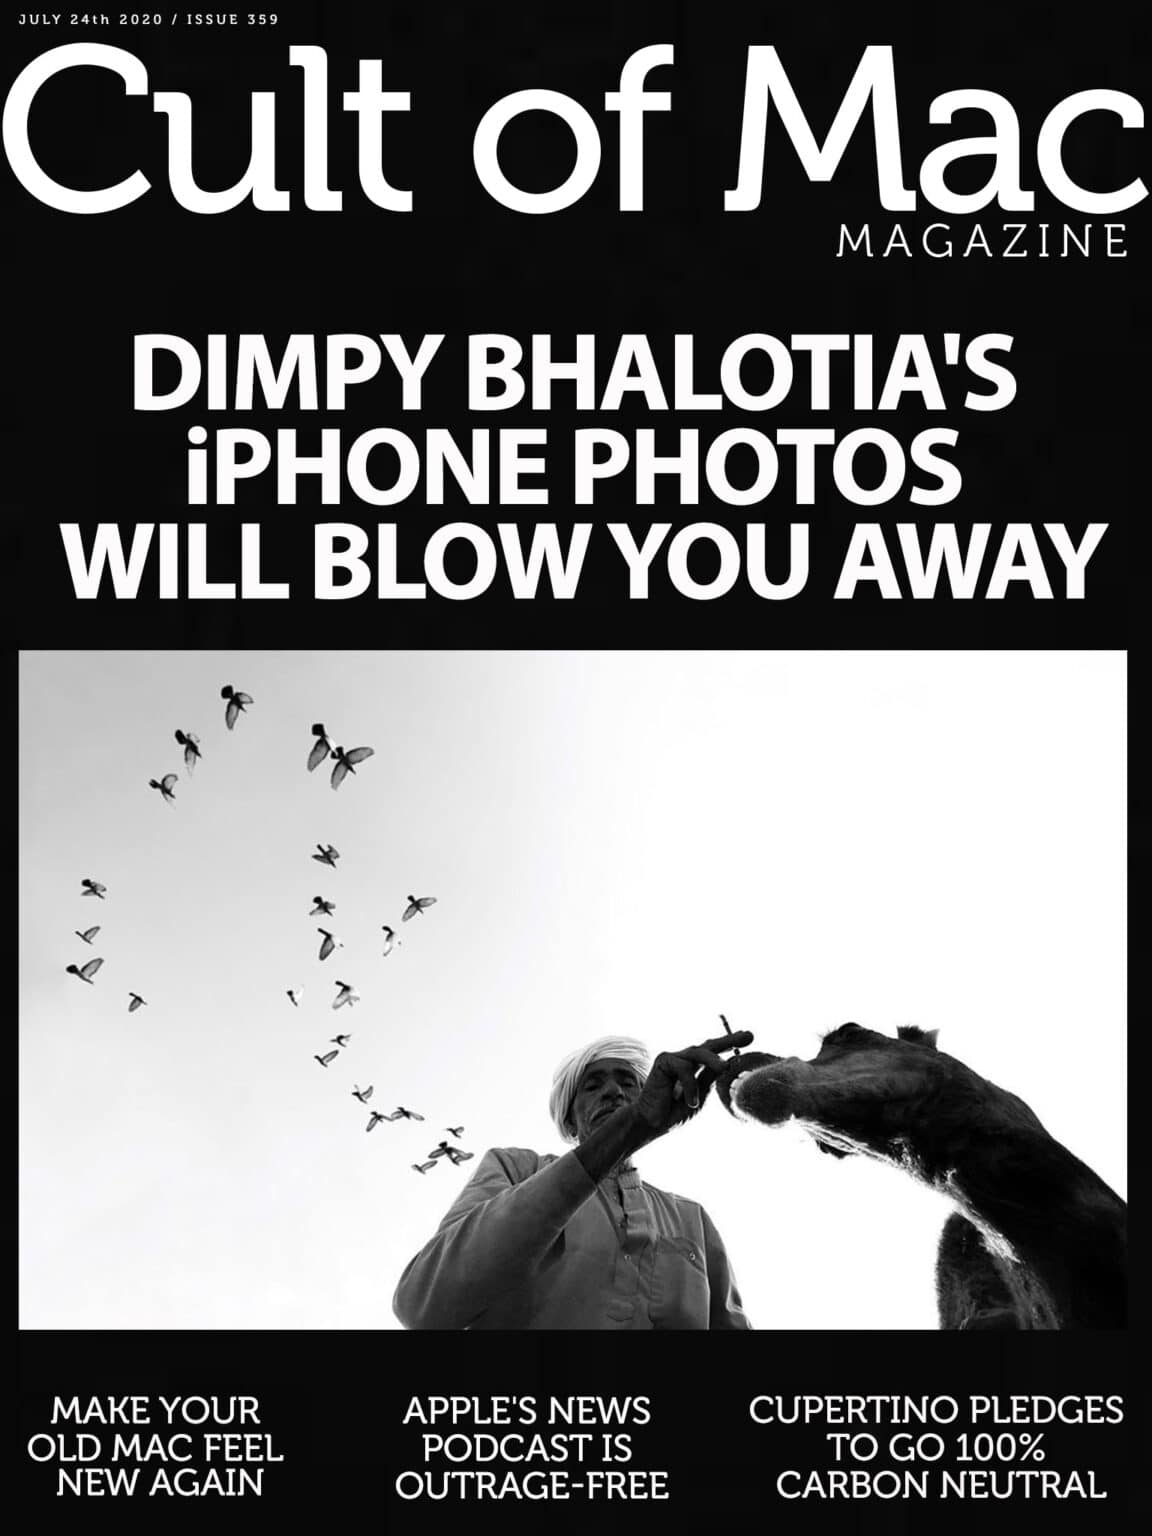 Award-winning iPhone photographer Dimpy Bhalotia shares some of her secrets for capturing the perfect moment.